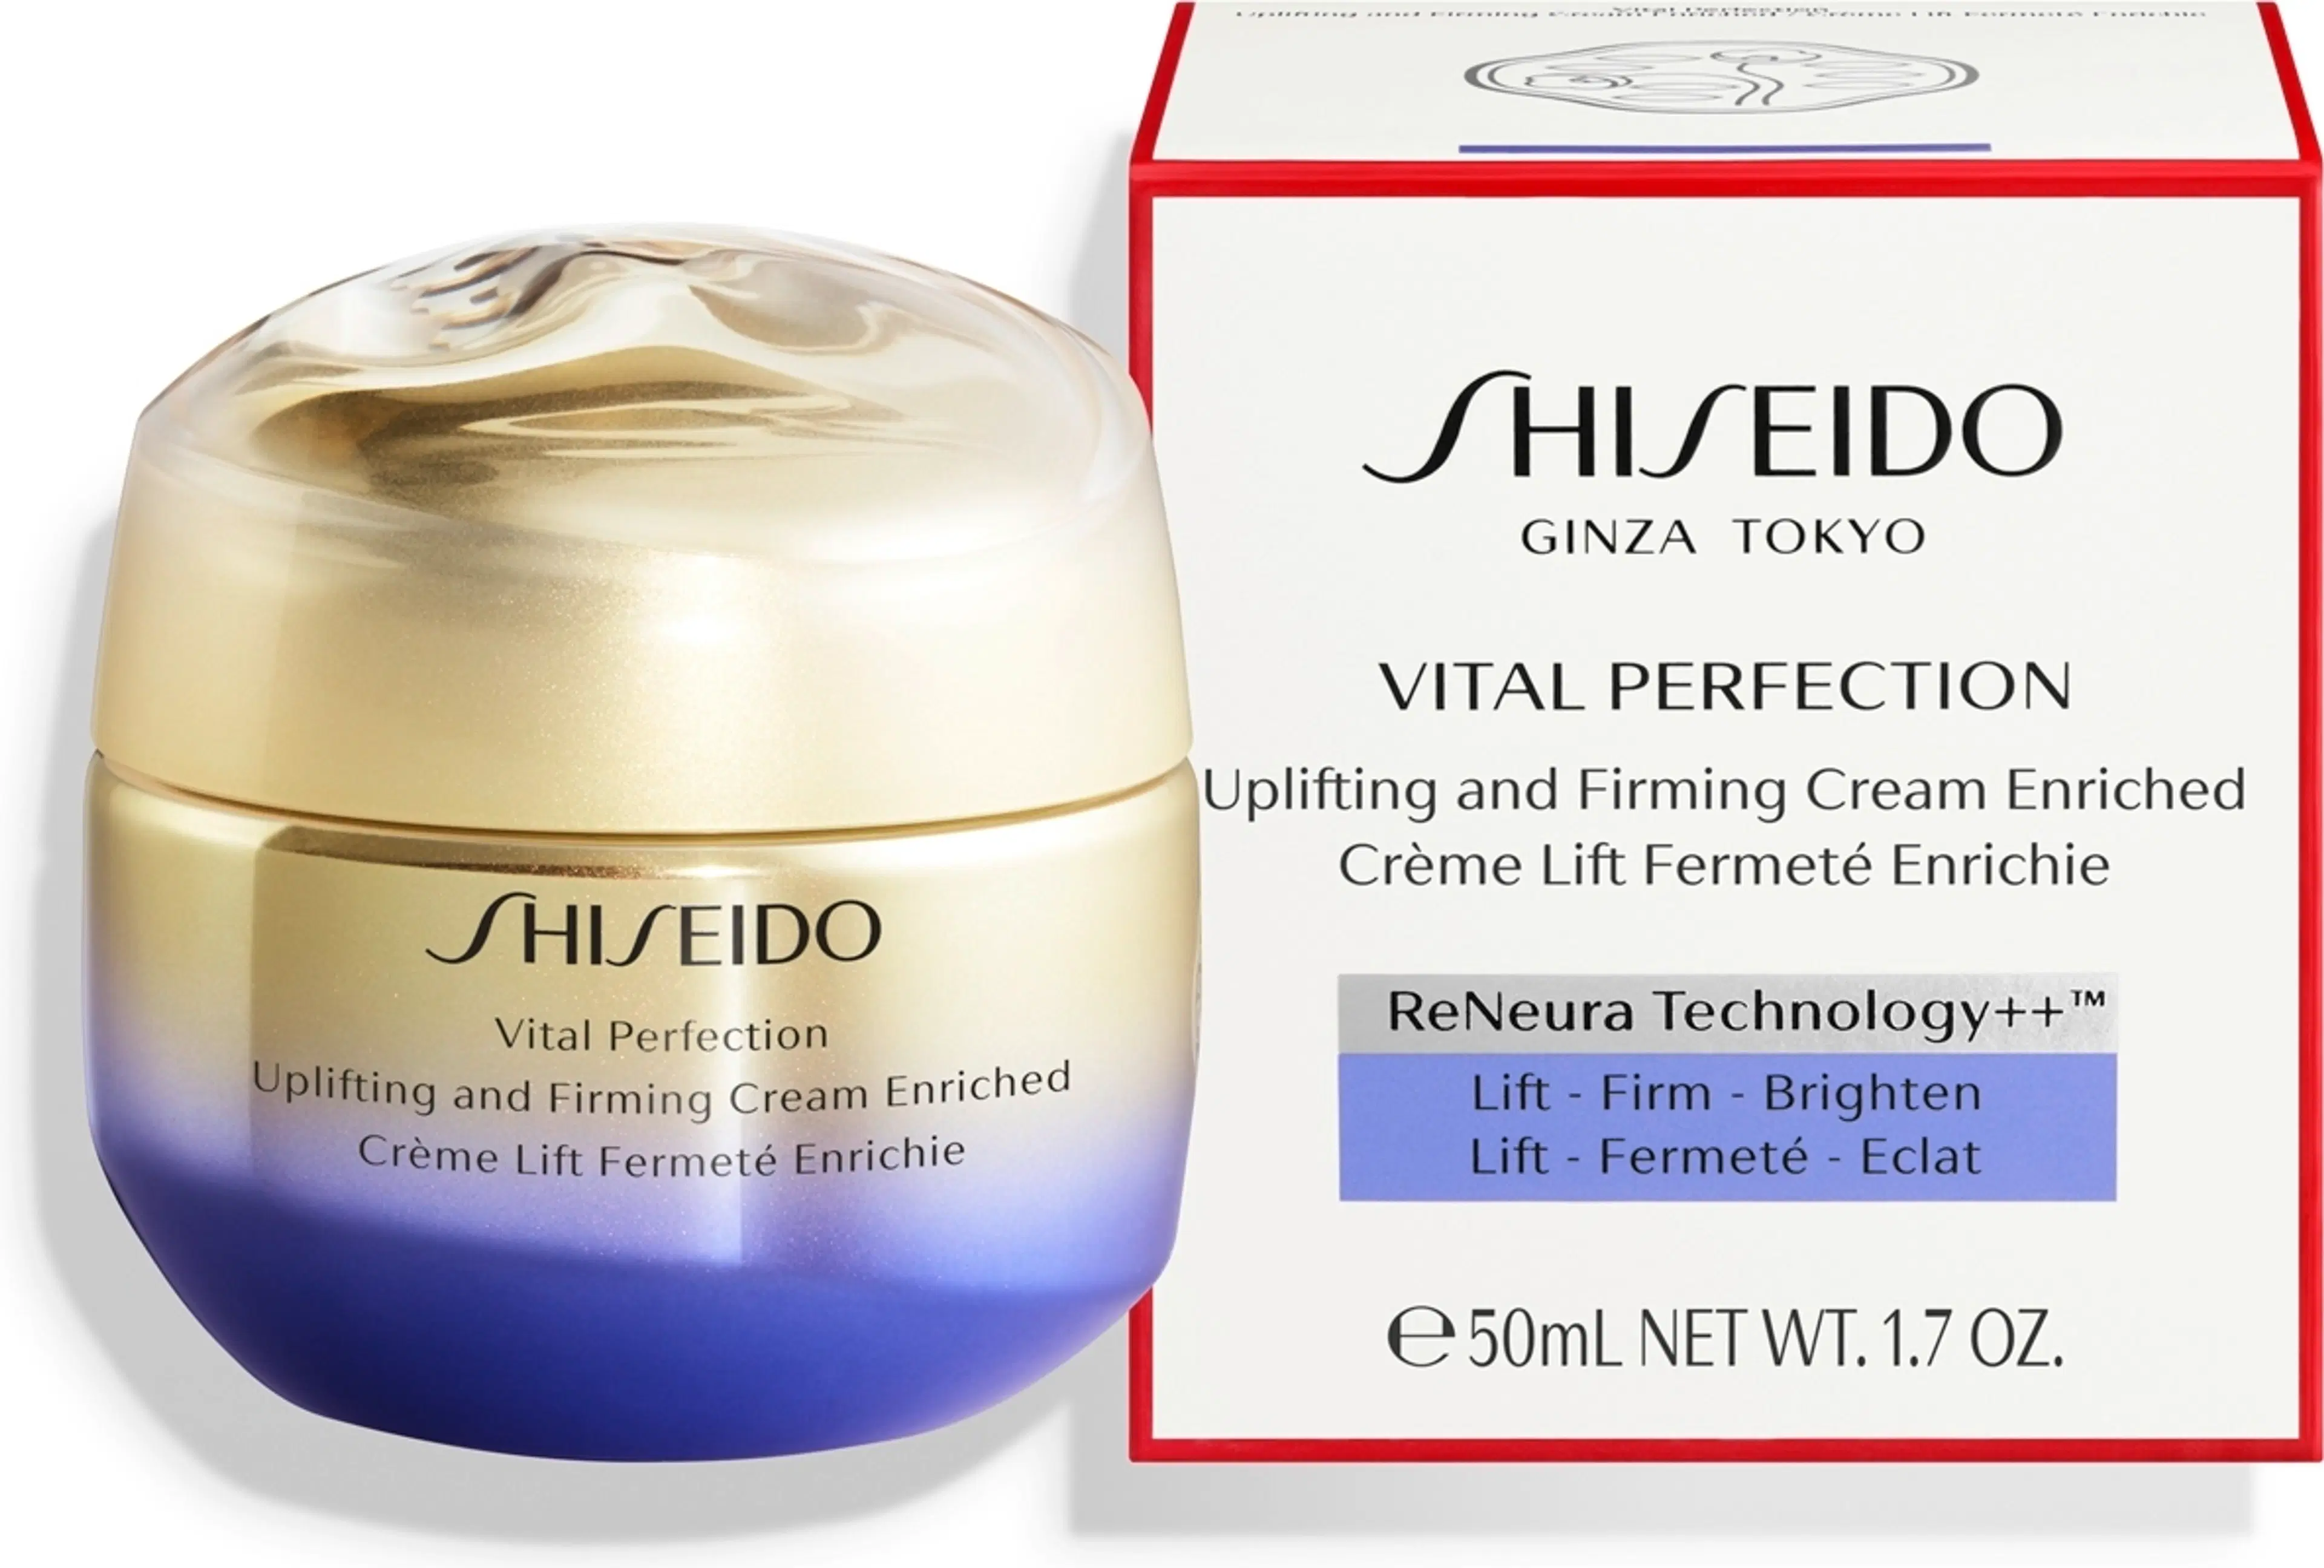 Shiseido Vital Perfection Uplifting and Firming Cream Enriched hoitovoide 50 ml